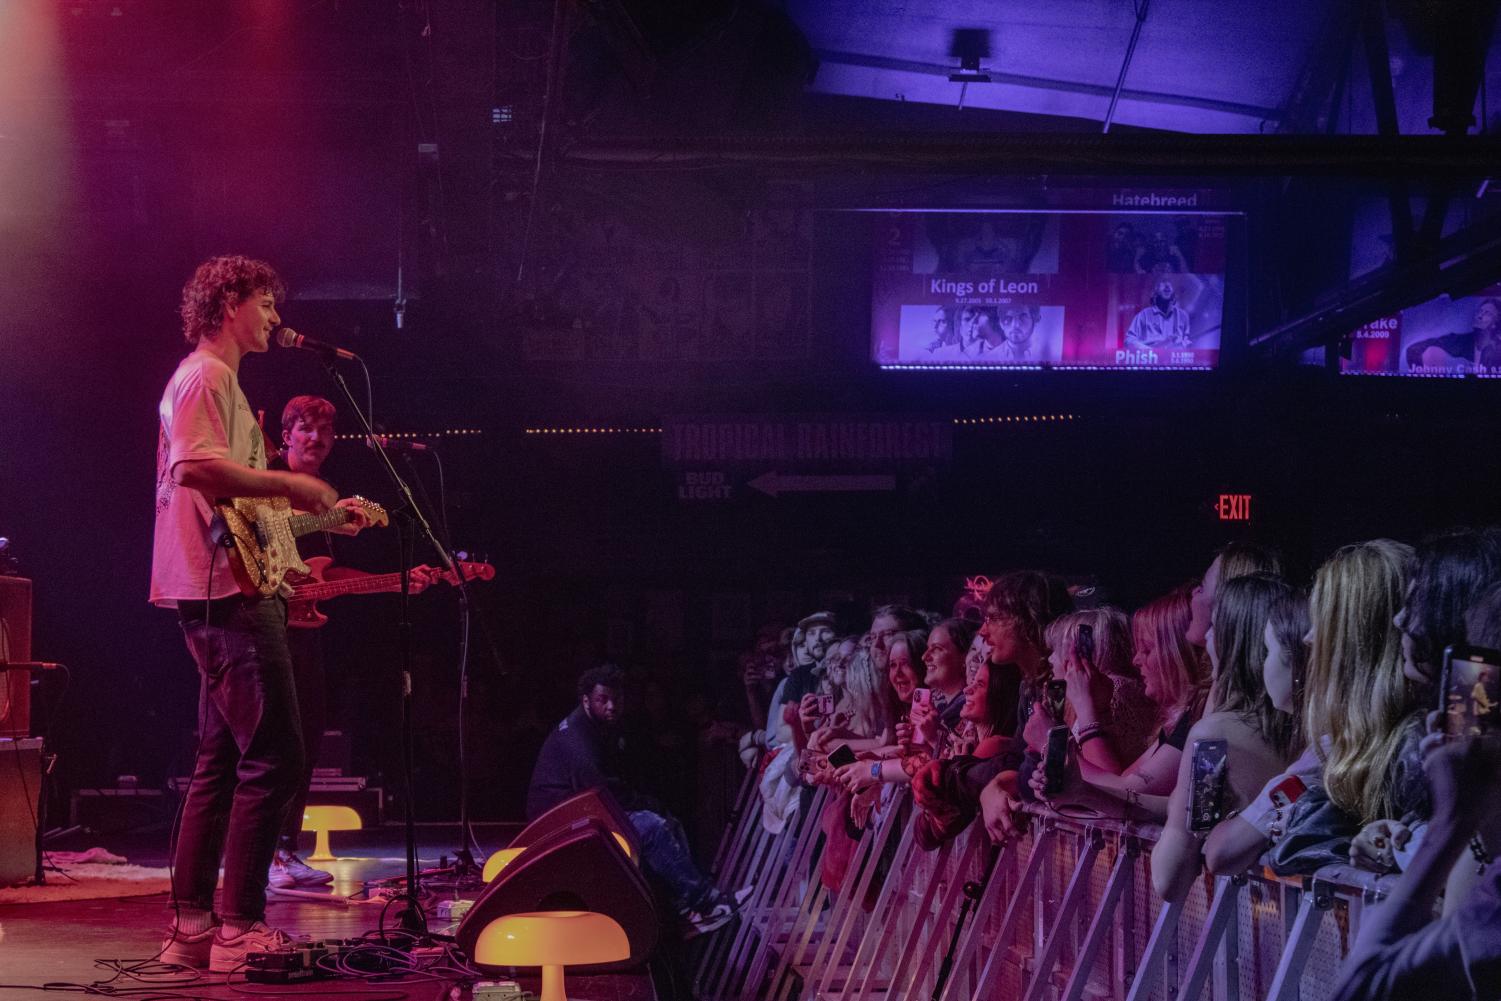 PHOTOS%3A+Houndmouth+and+Oliver+Hazard+at+Toads+Place